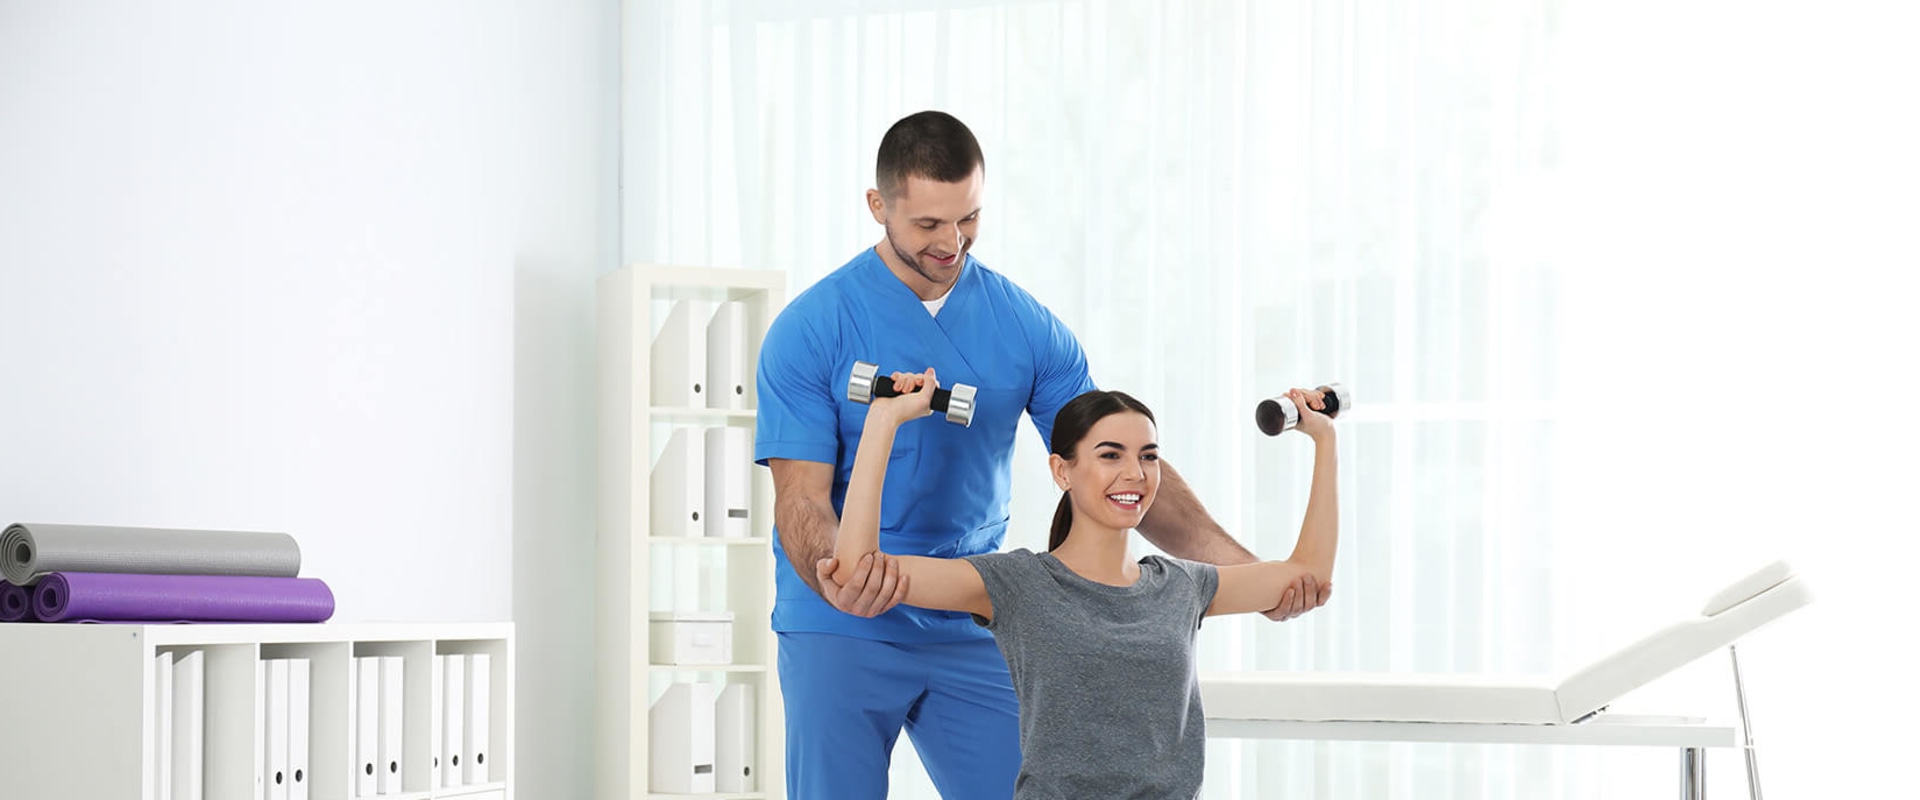 How Long Does a Typical Physical Therapy Session Last?